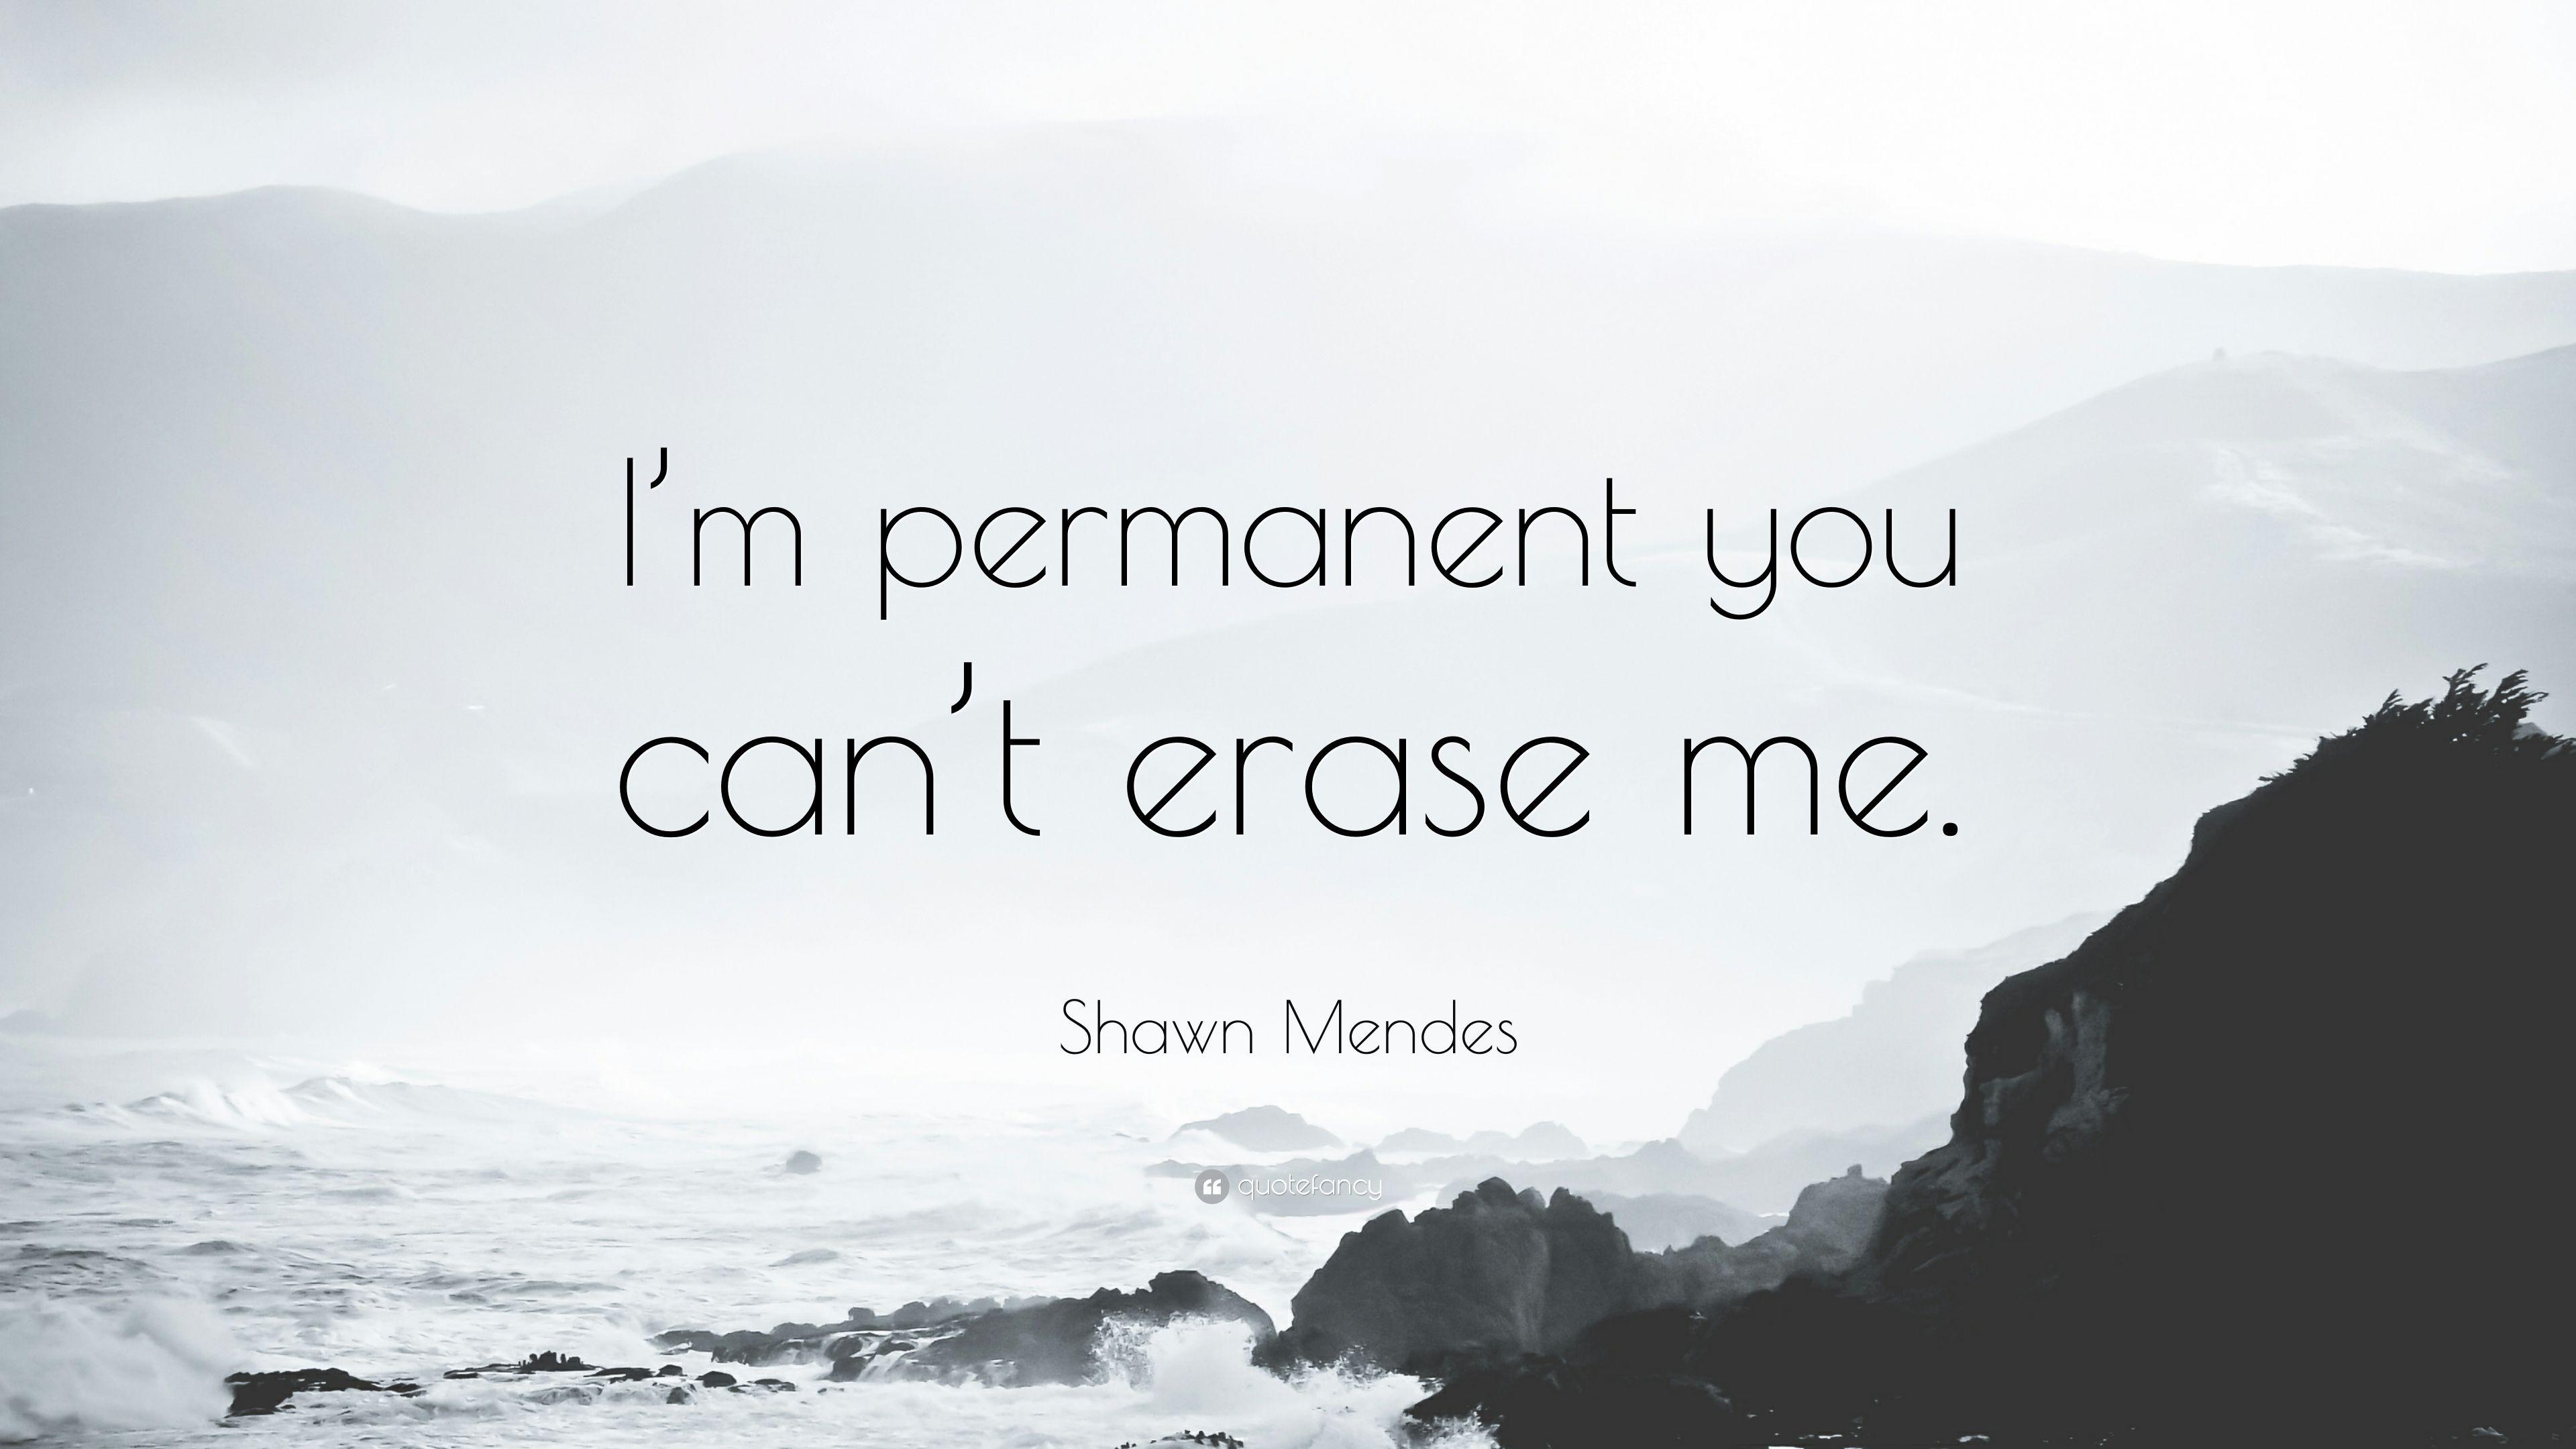 Shawn Mendes Quotes (6 wallpaper)